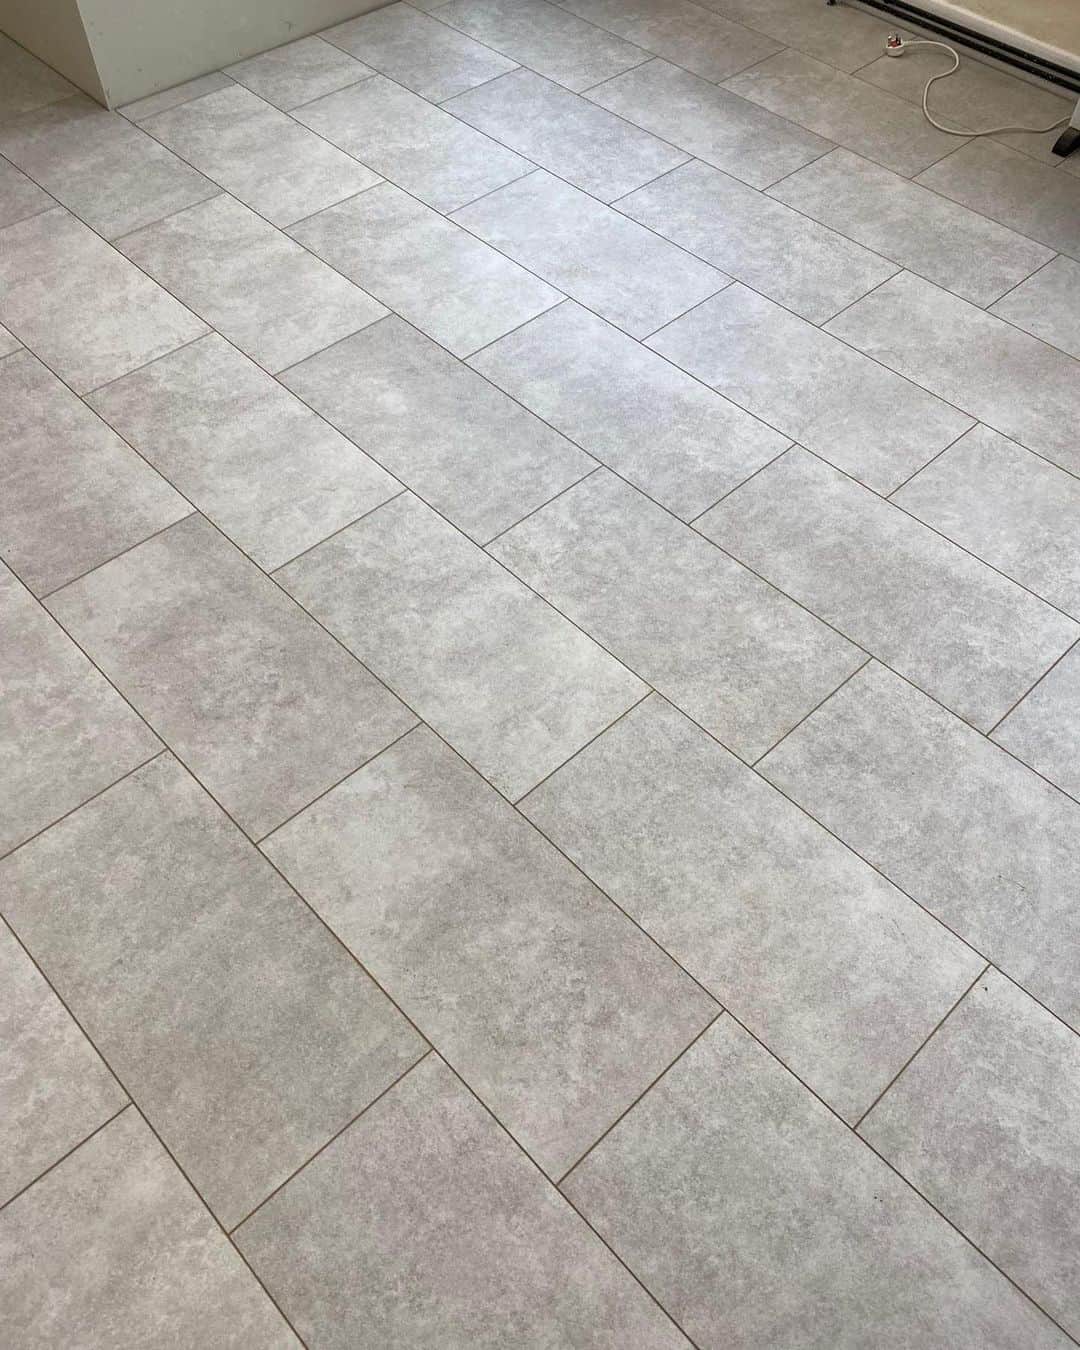 Is it Beneficial to Put Laminate Over your Tile Floor